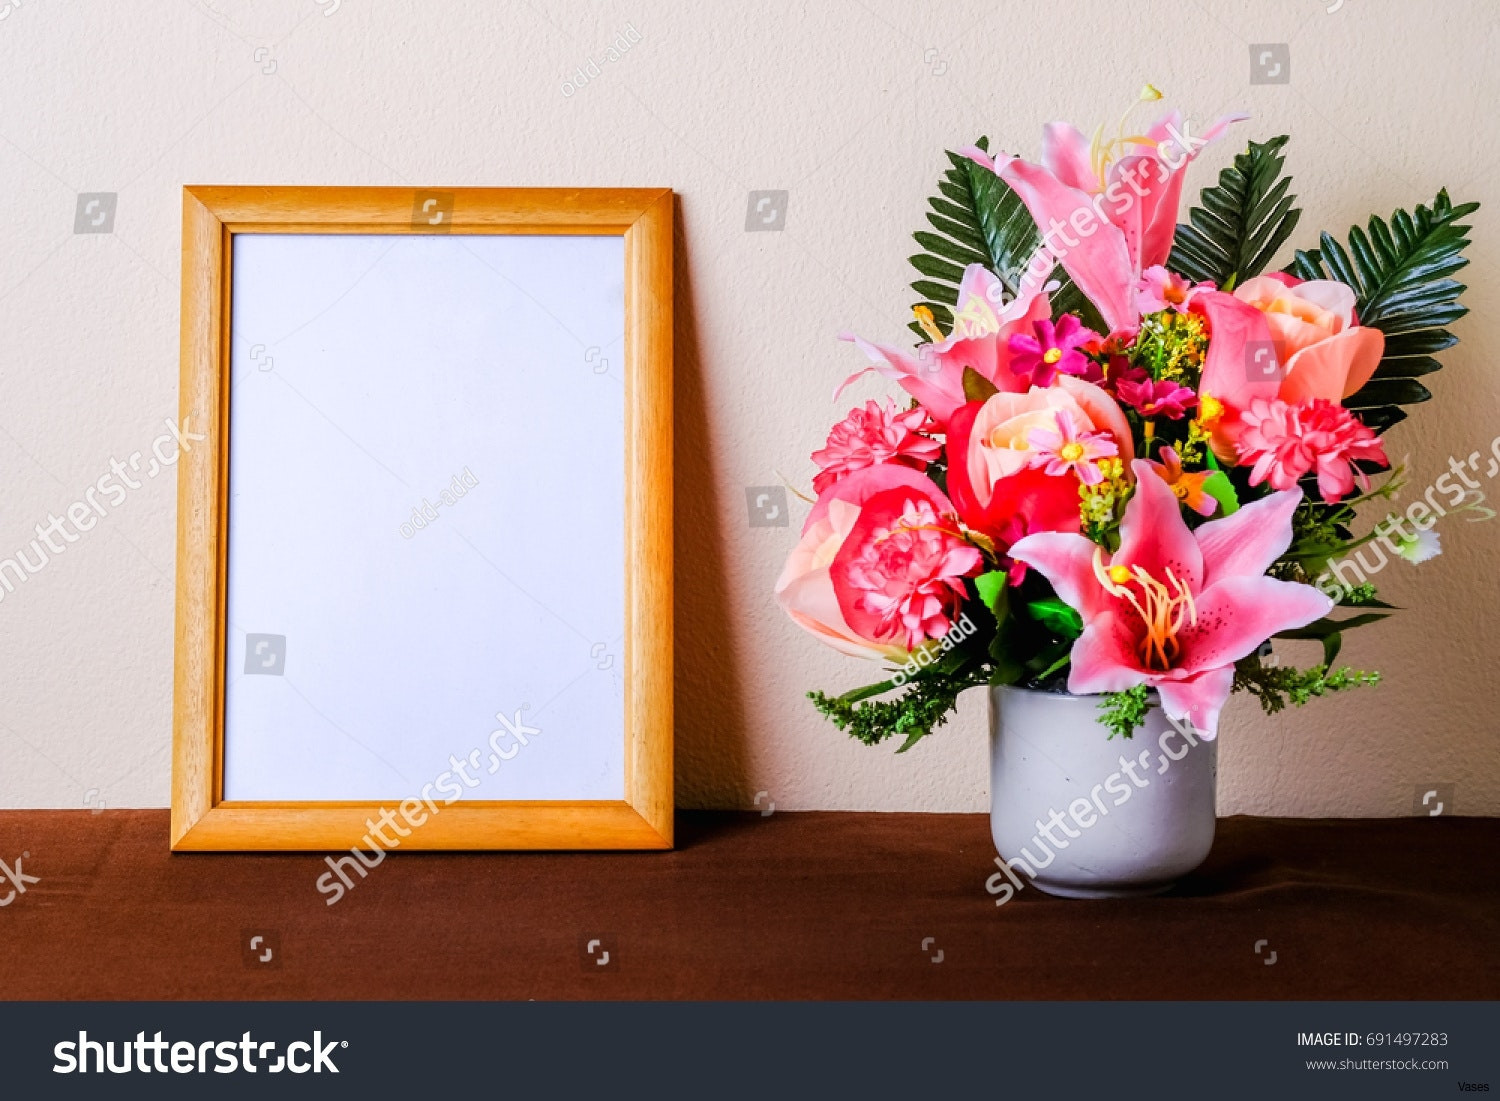 19 Great Picture Frame Vase 2024 free download picture frame vase of luxury free stock photo picture frame photo frames collection throughout stock photo empty frame with flower vase still life 691497283h vases picture photoi 20d